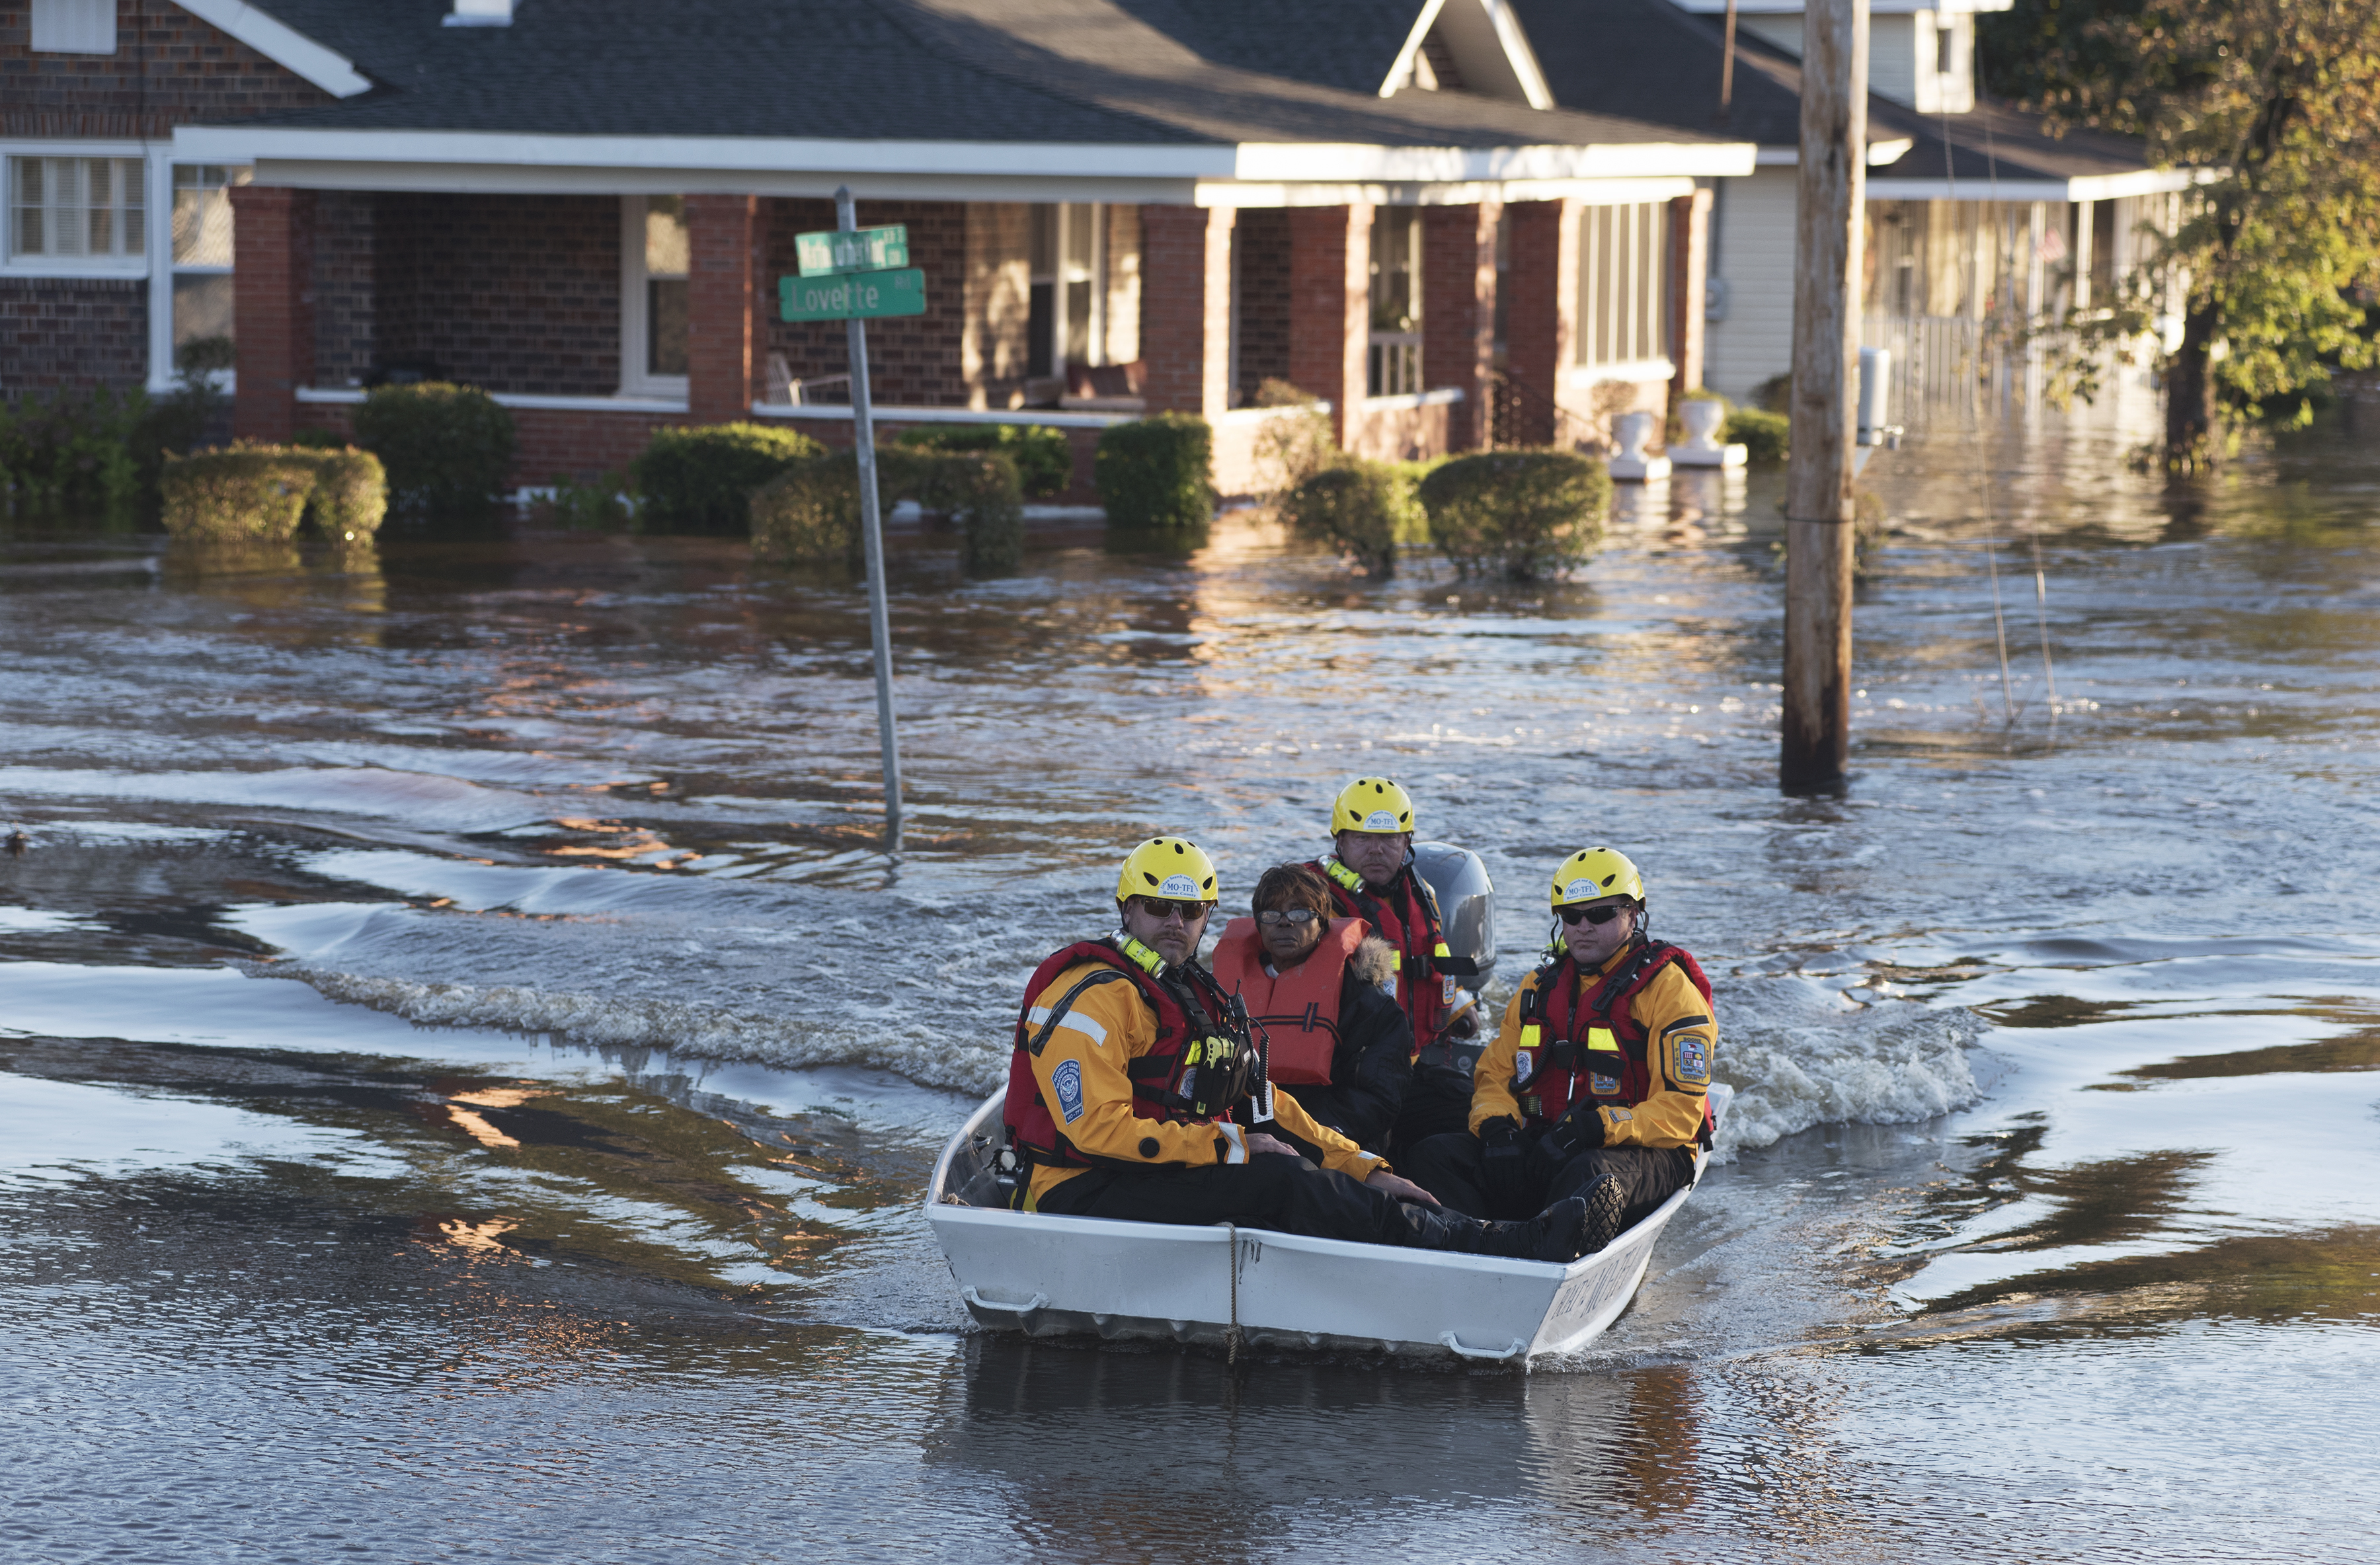 A swift water rescue team transports a resident of to safety on a street covered with floodwaters caused by rain from Hurricane Matthew in Lumberton, N.C., Monday, Oct. 10, 2016. (AP Photo/Mike Spencer)